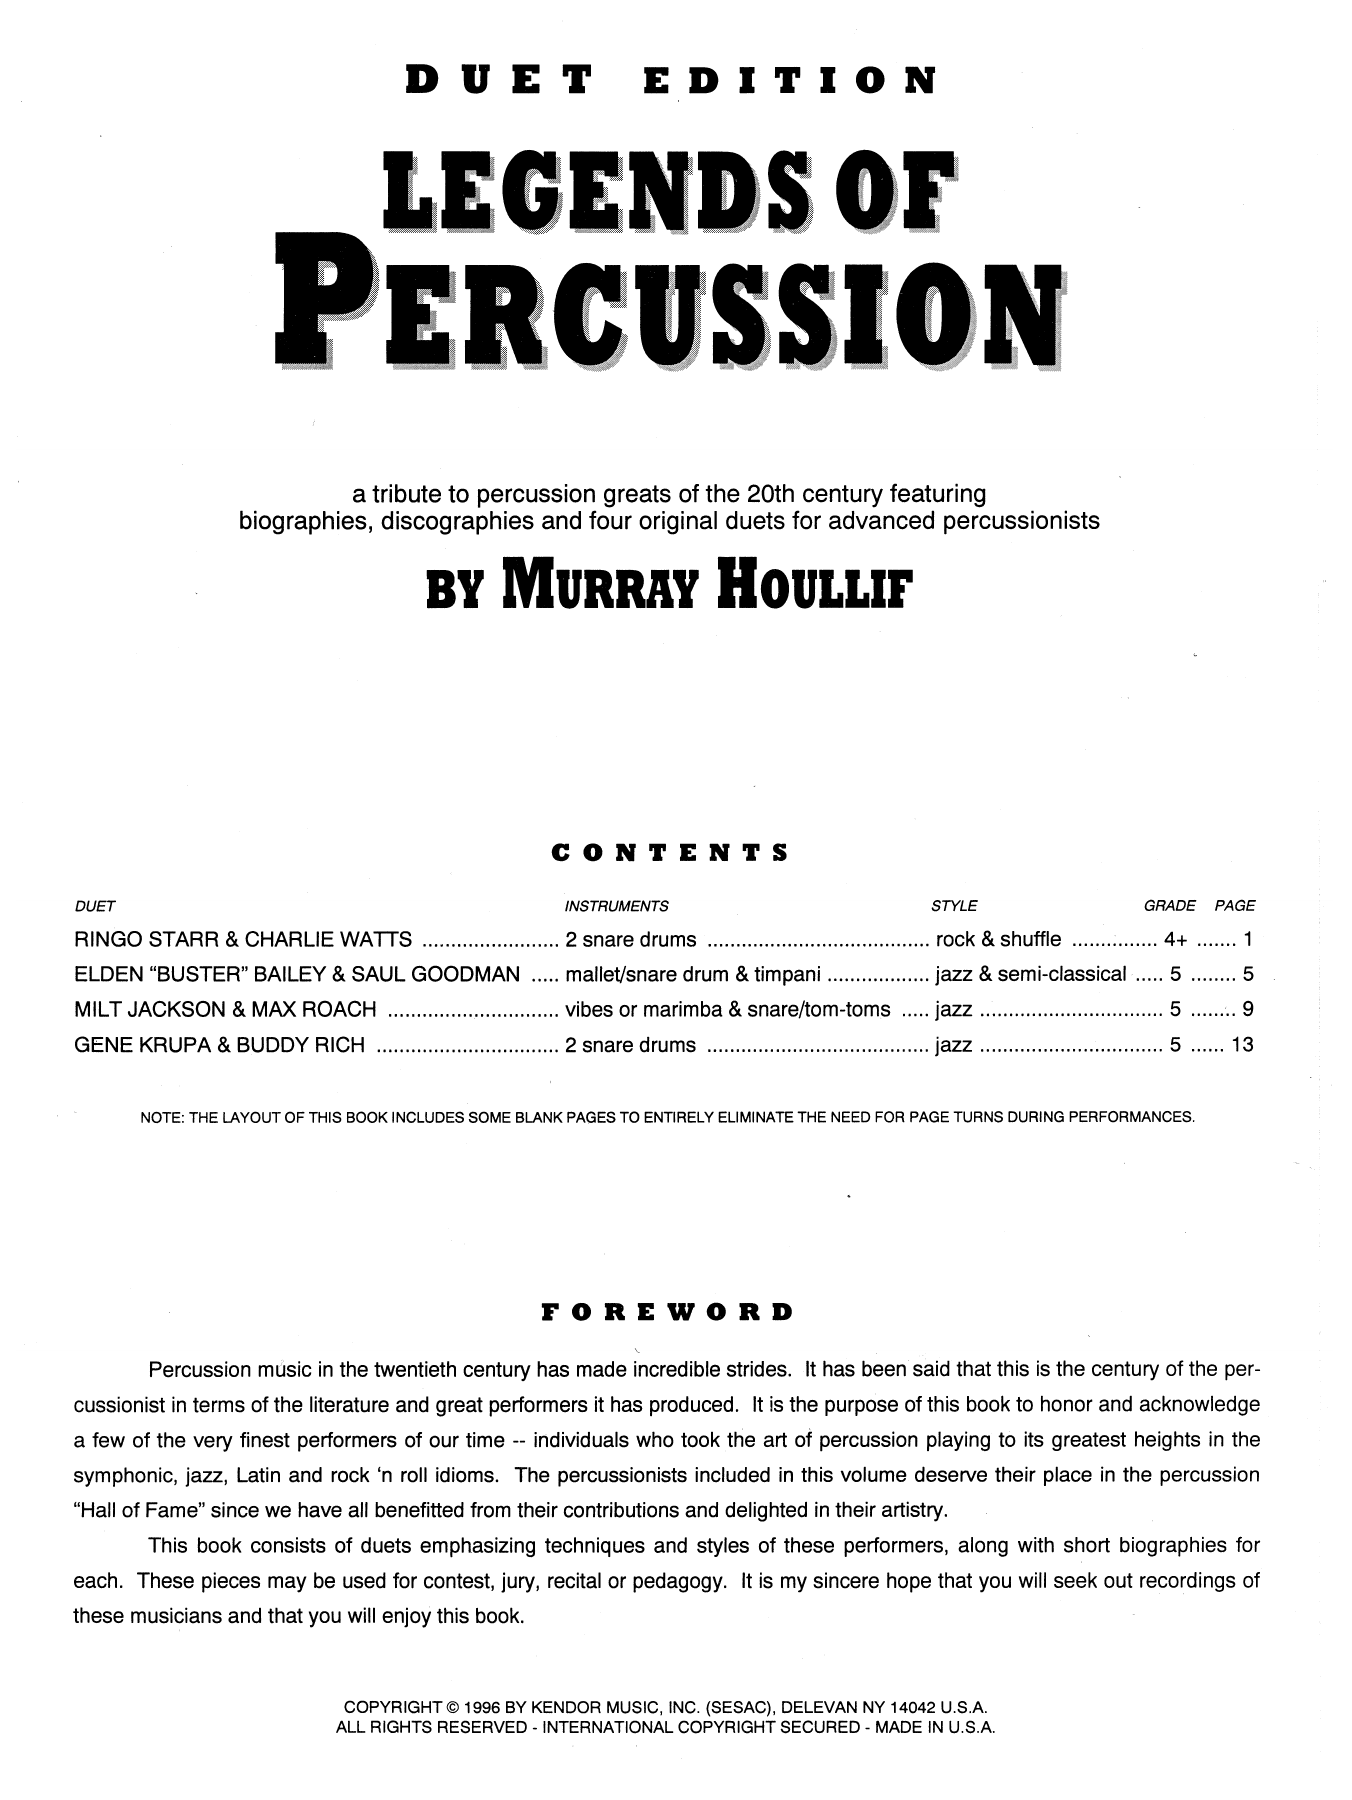 Download Murray Houllif Legends Of Percussion, Duet Edition Sheet Music